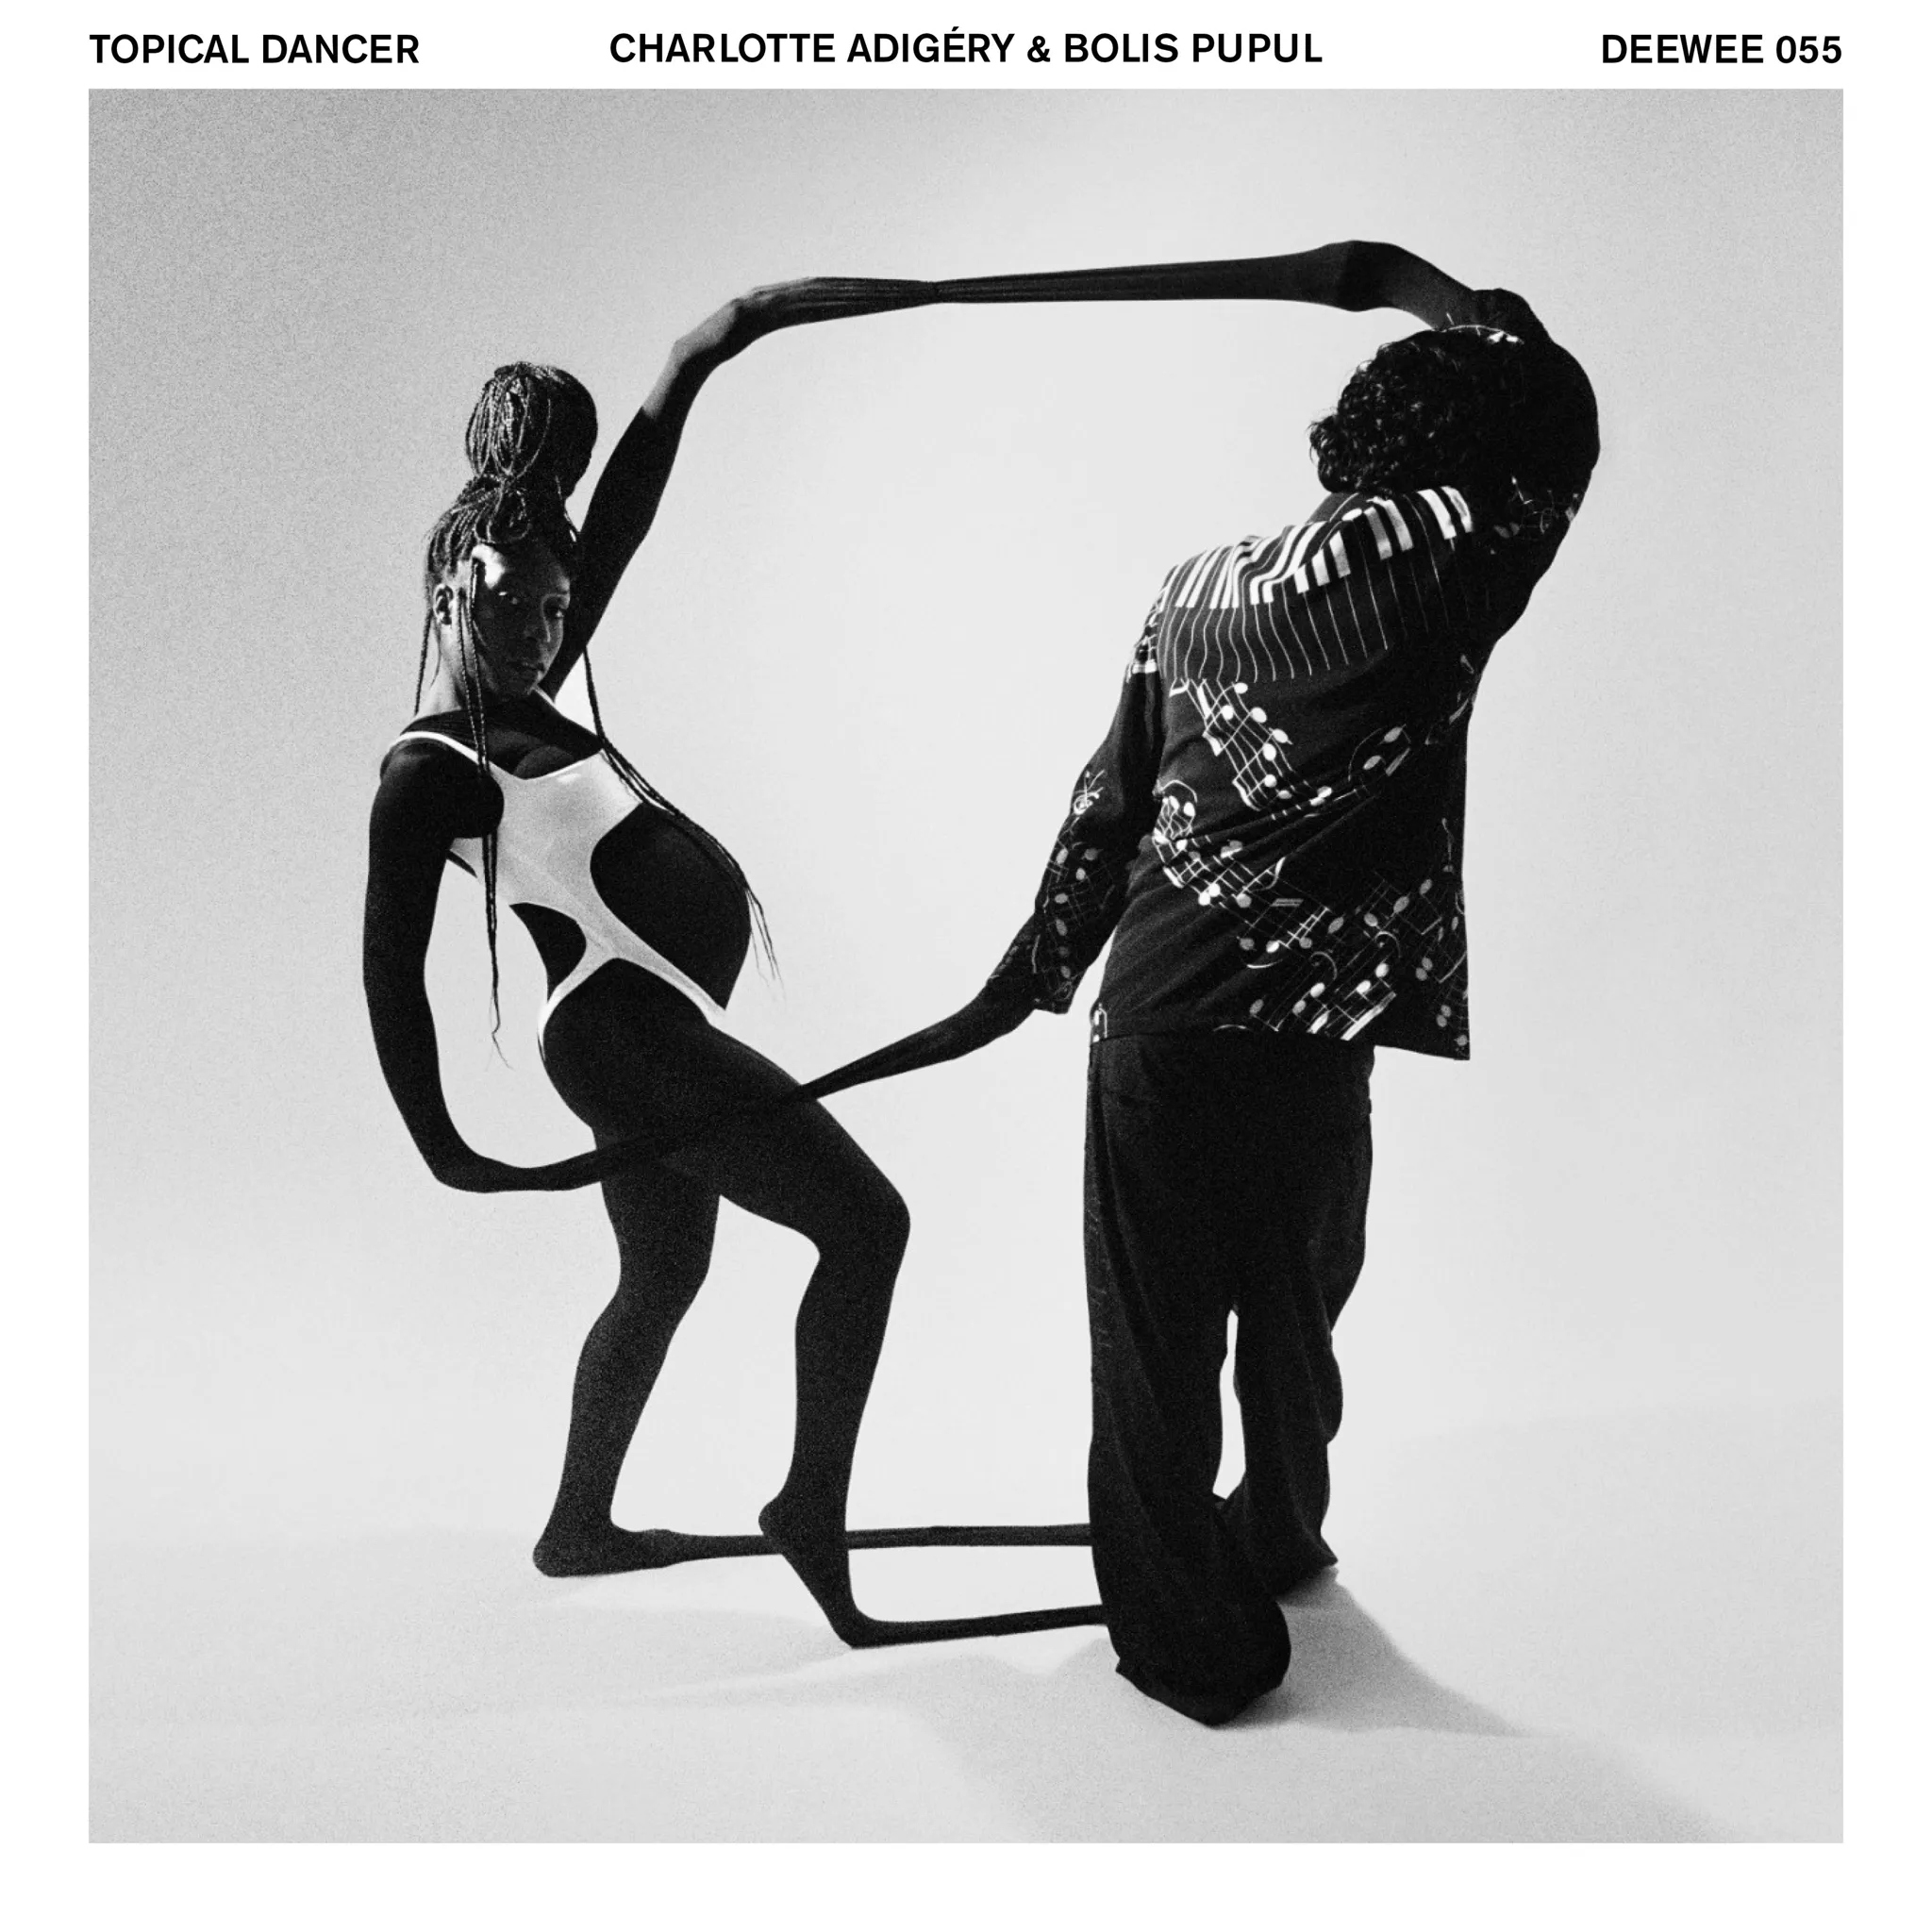 Album artwork for Topical Dancer by Charlotte Adigery and Bolis Pupul 